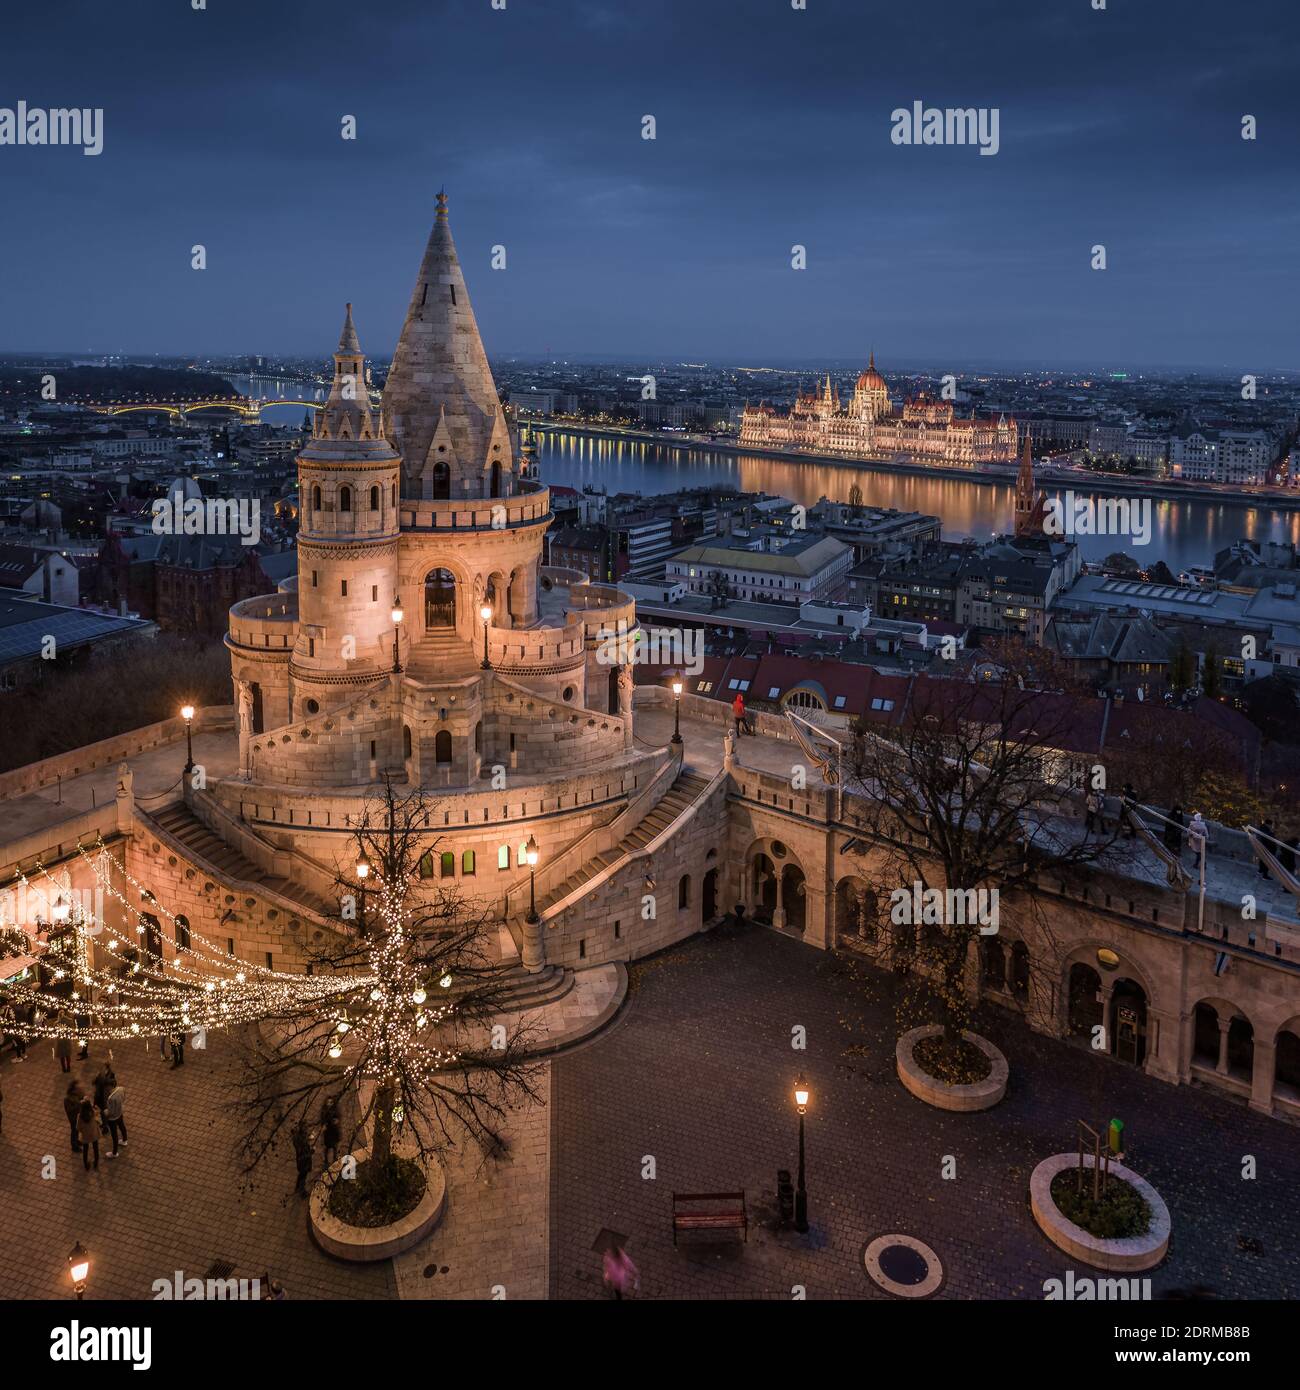 Budapest, Hungary - Aerial view of the famous illuminated Fisherman's Bastion (Halaszbastya) with Parliament of Hungary and festive lights at blue hou Stock Photo